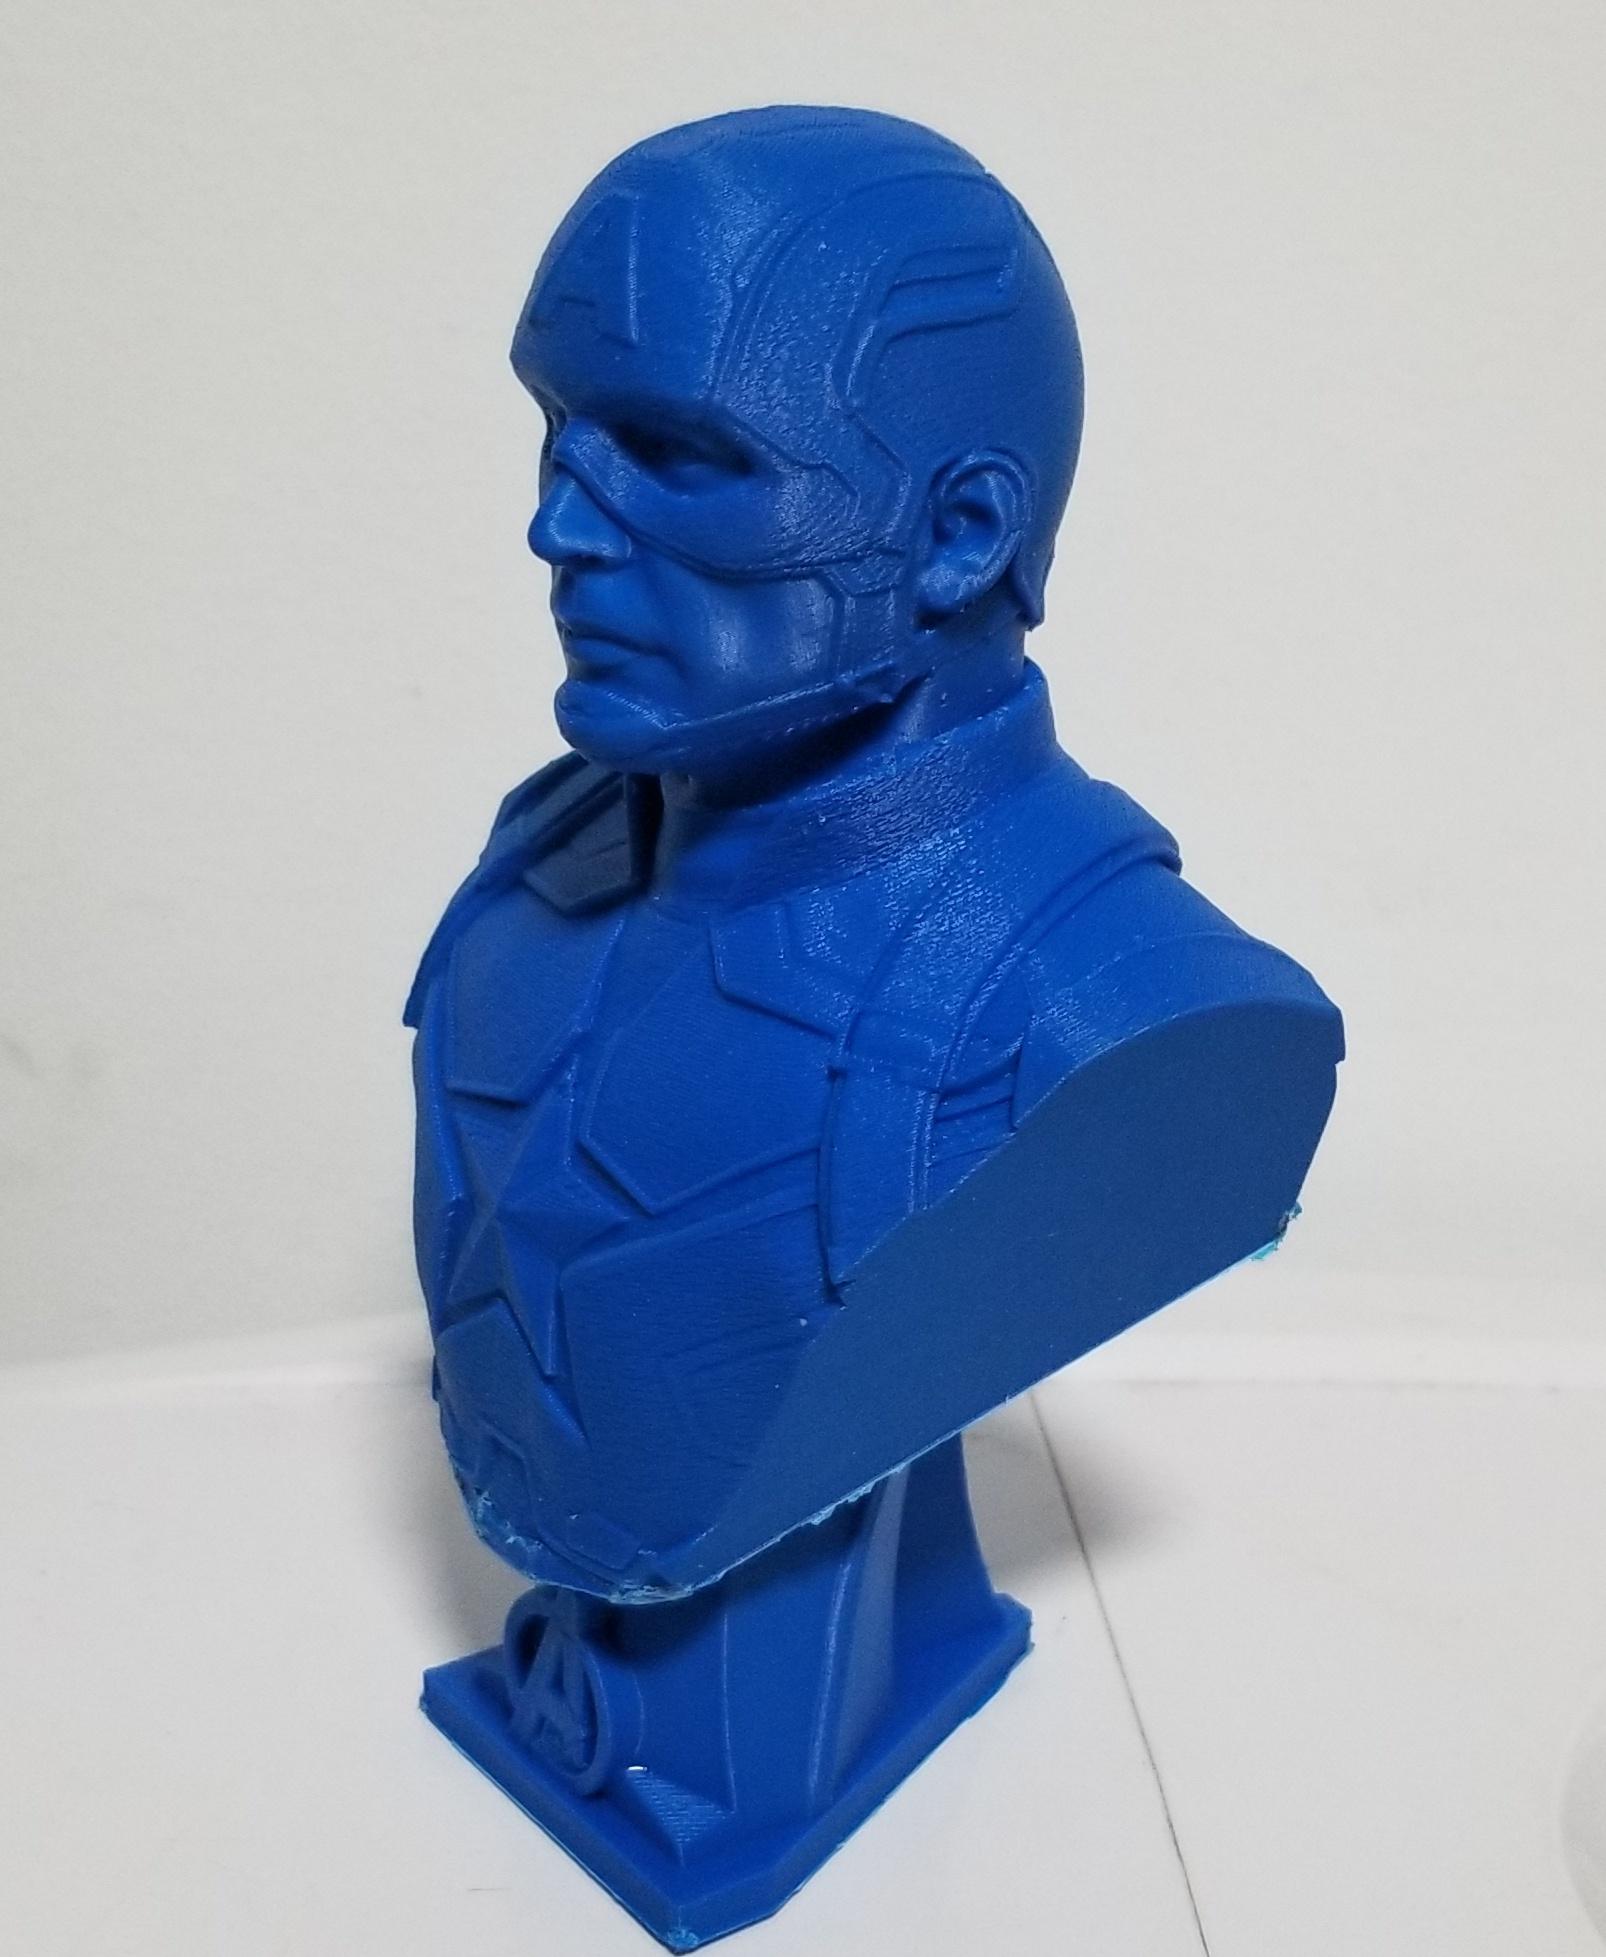 Captain America Bust (Pre-Supported) 3d model